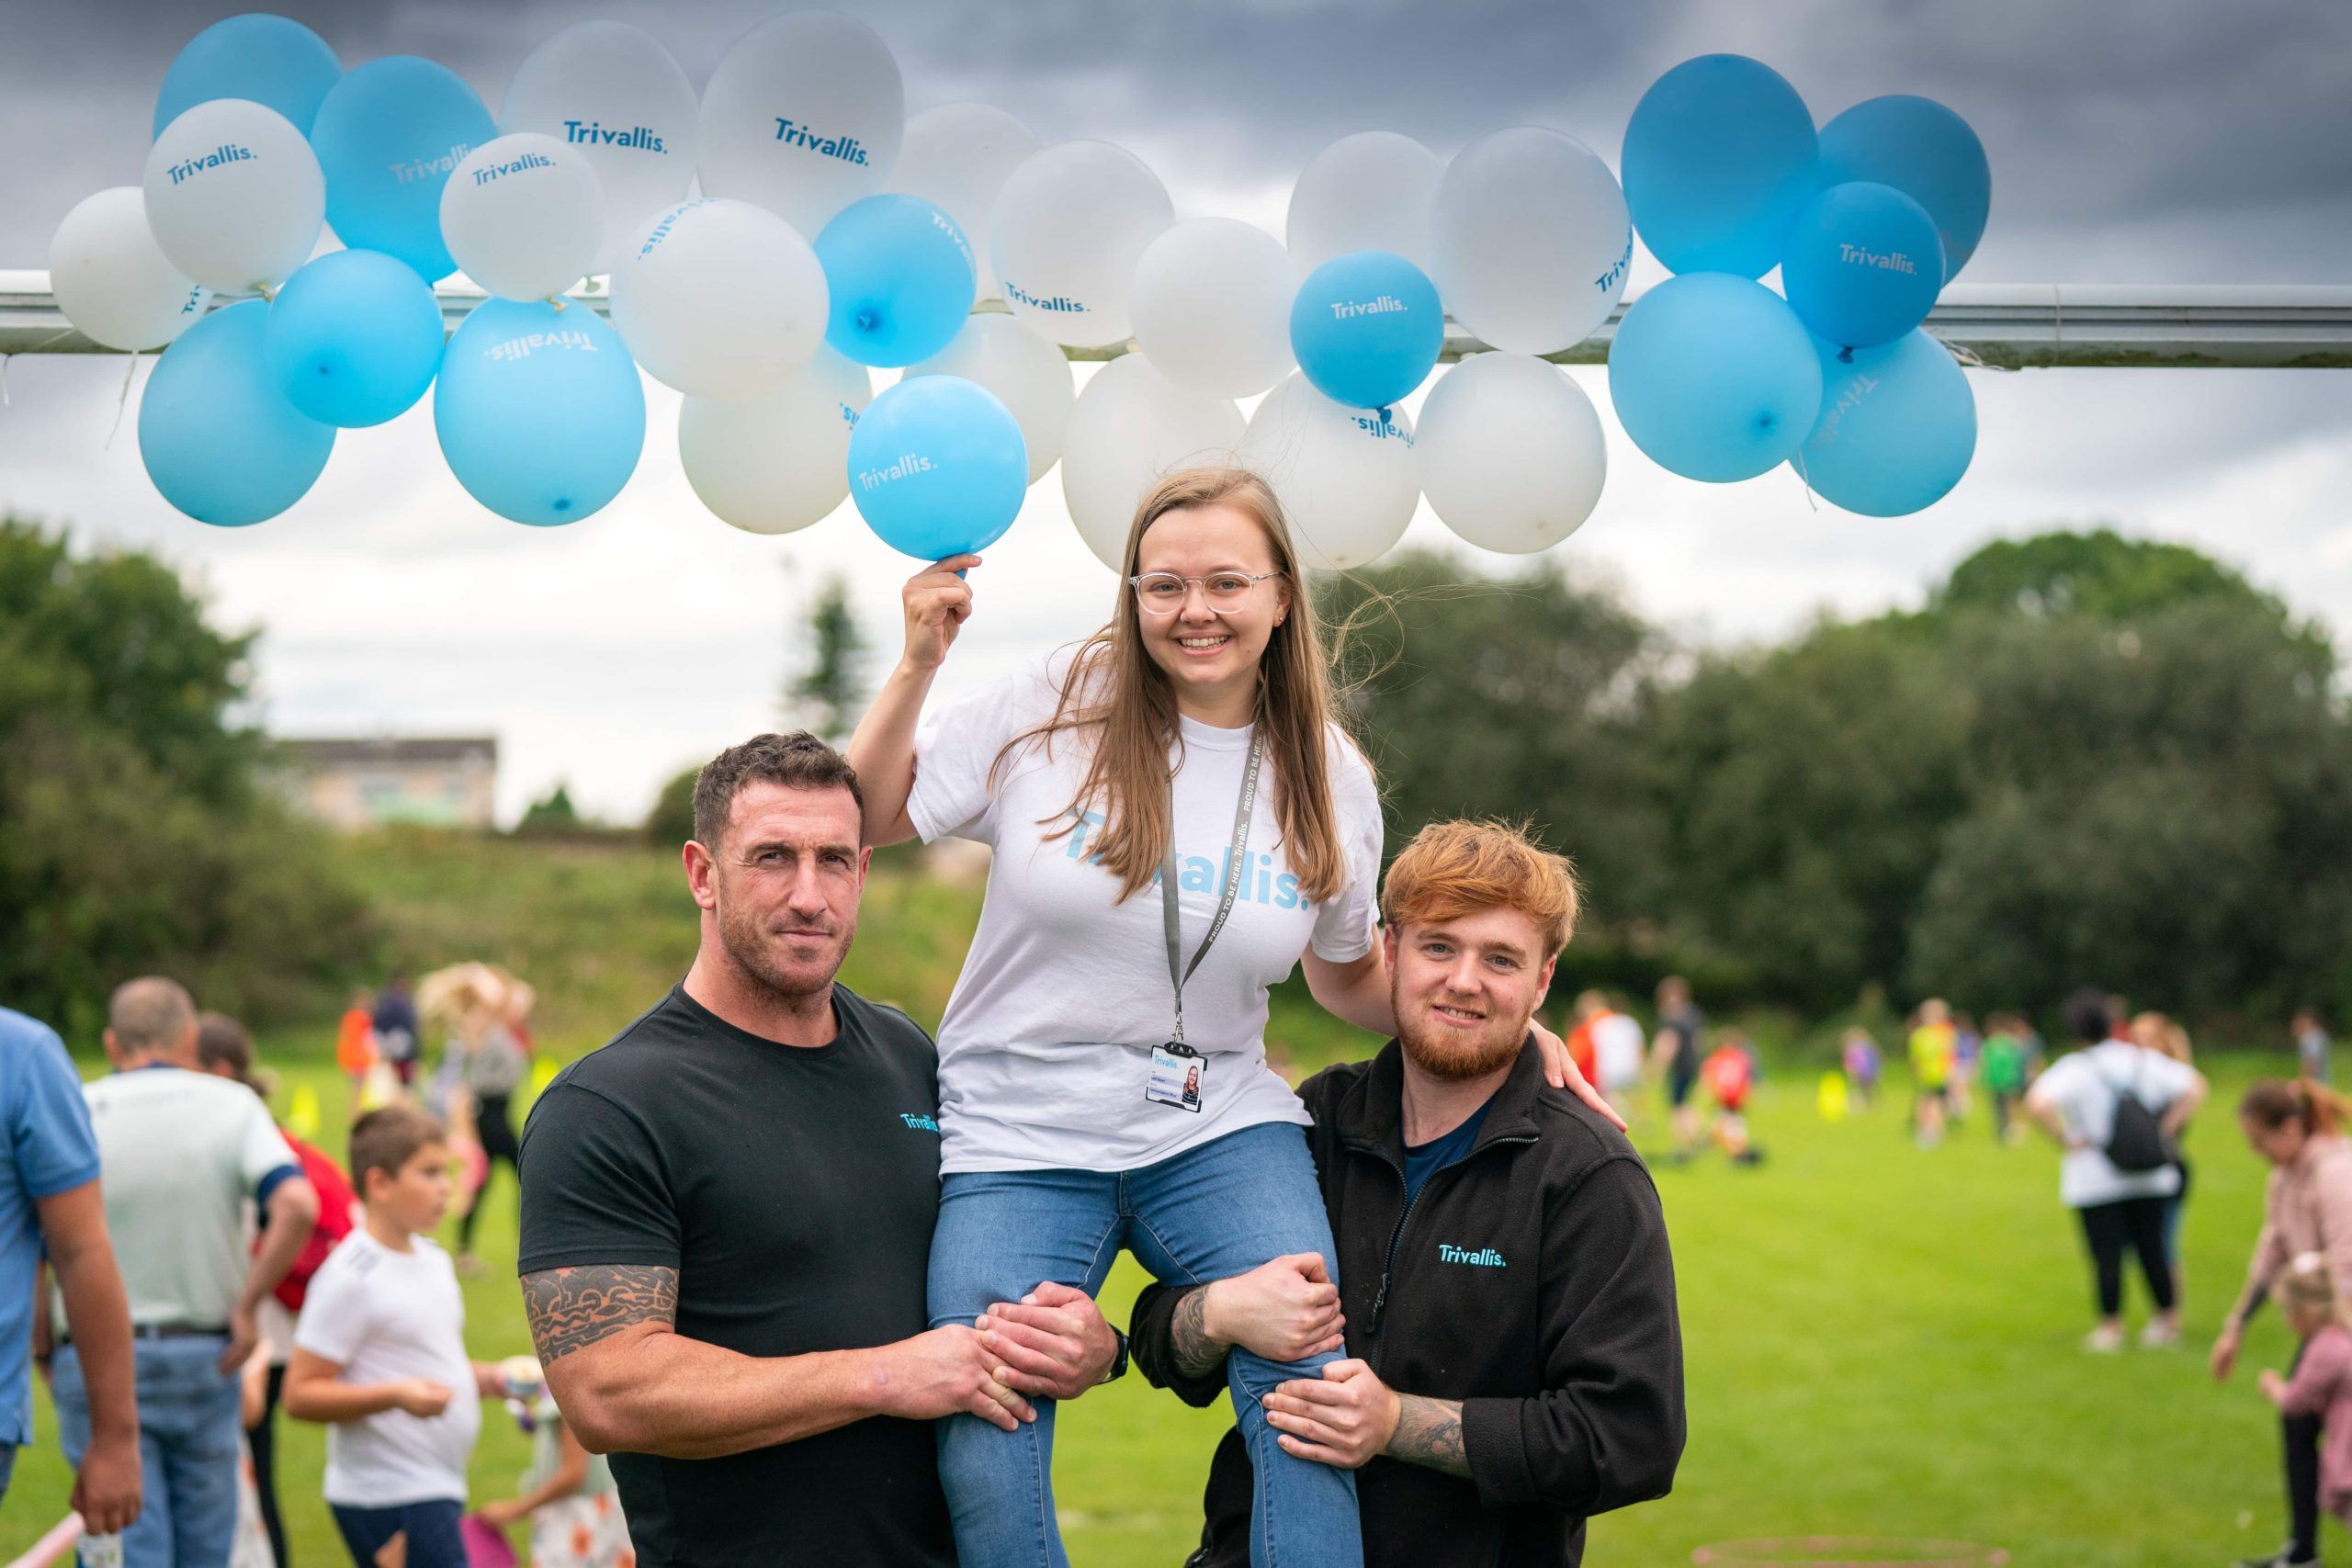 Trivallis Housing Landlord Wales Two men lifting a woman on their shoulders at an outdoor RCT housing event with blue and white balloons in the background.